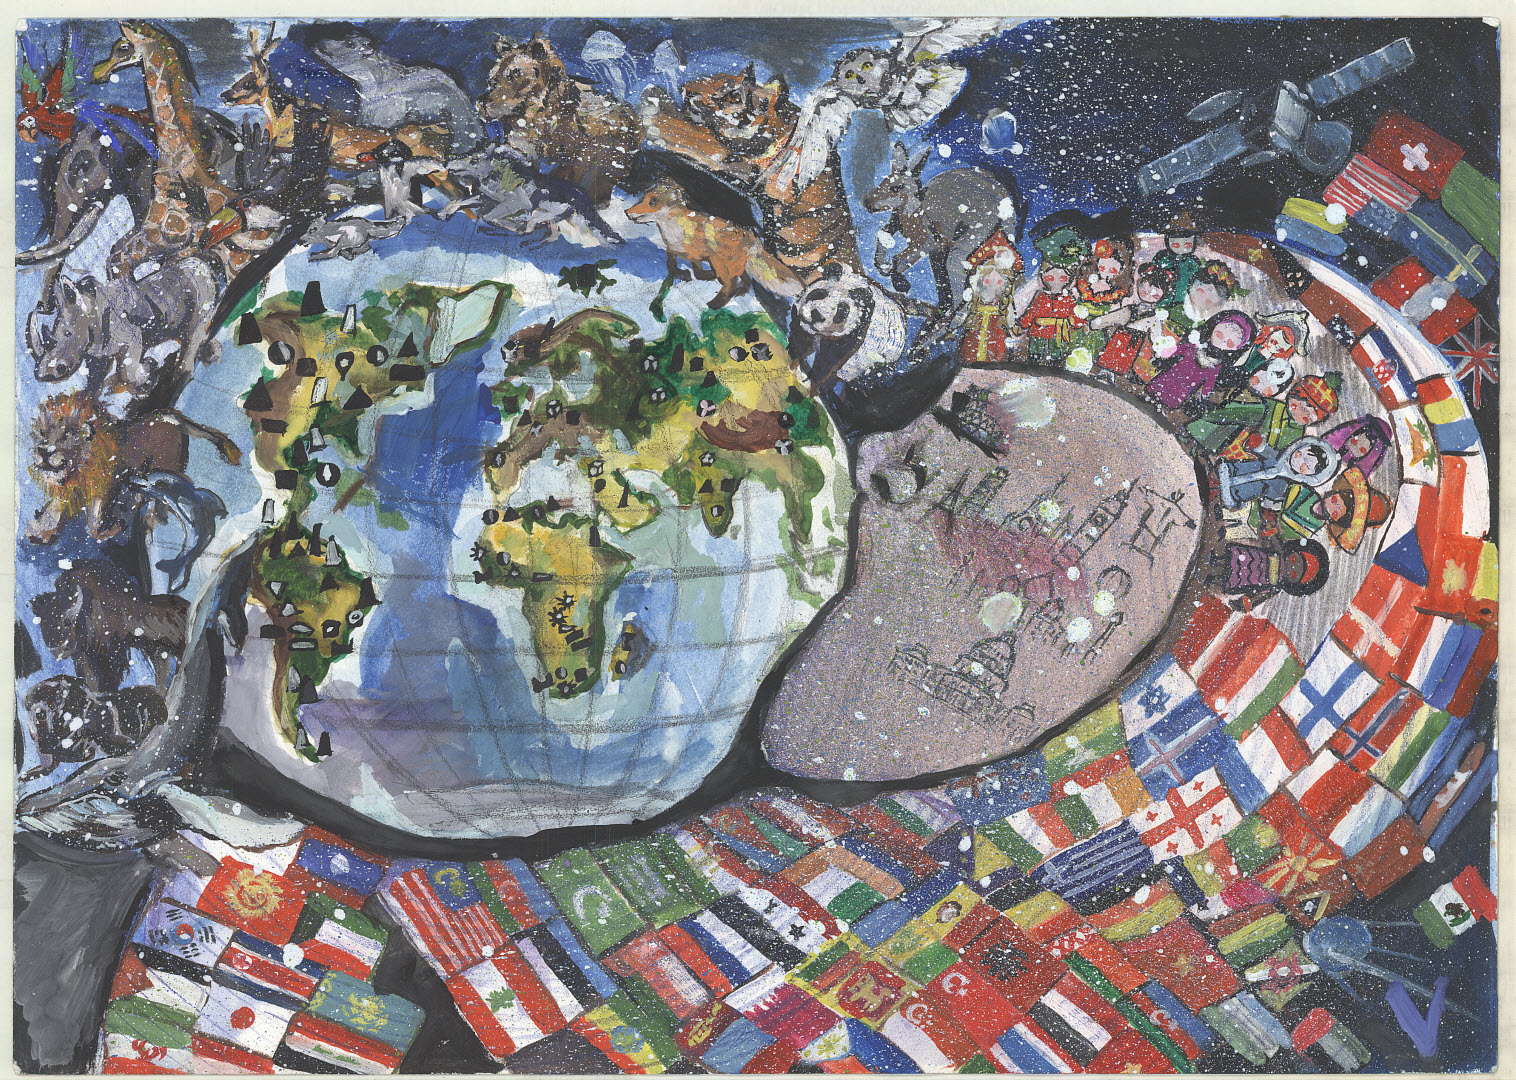 Shows the continents, animals, people, country flags, satellites